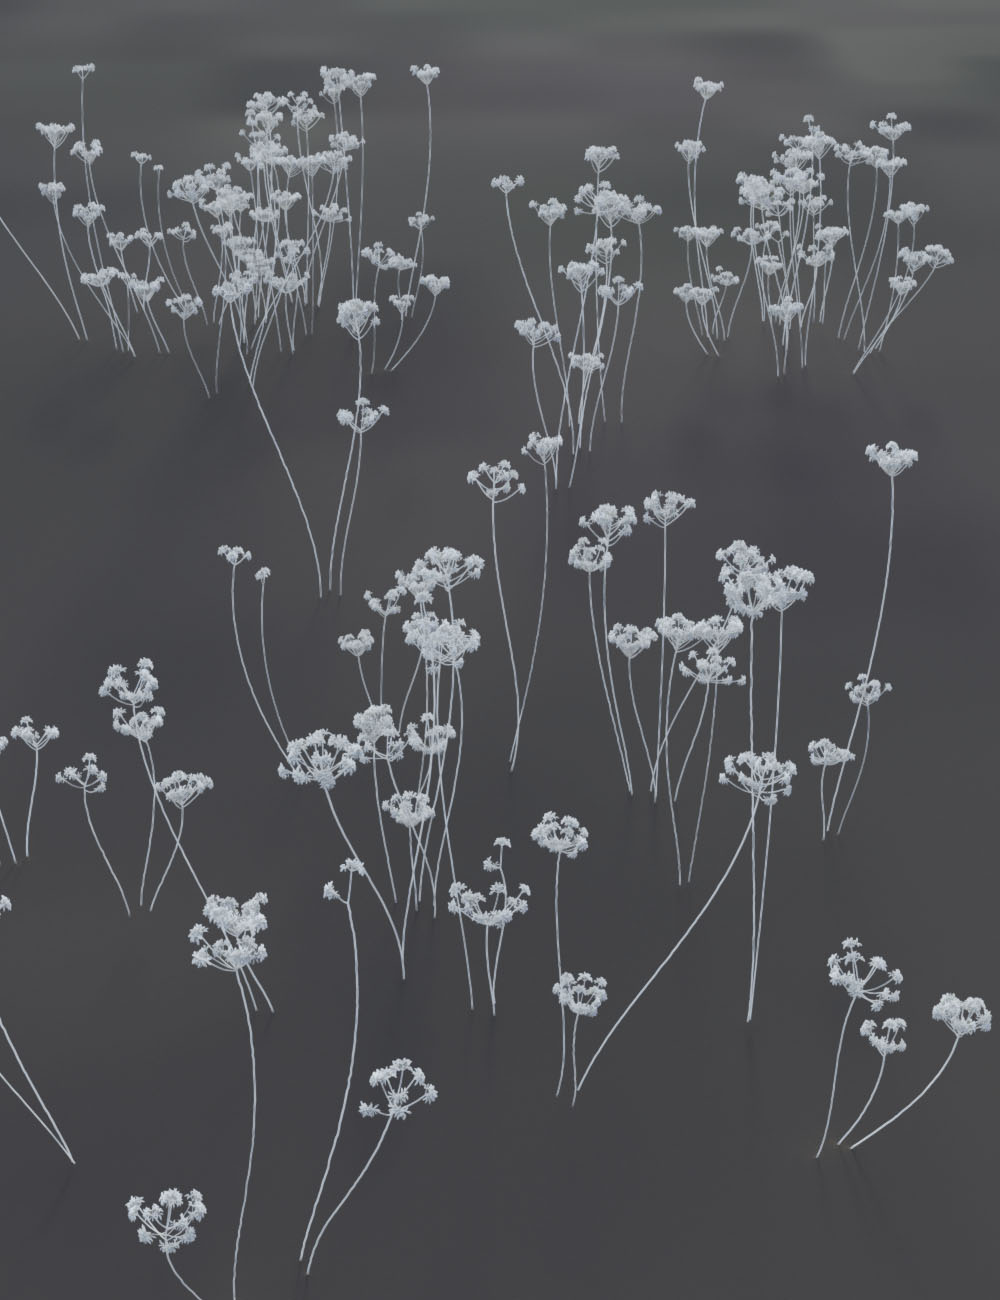 Wildflowers  - Tall Weeds and Seed heads by: MartinJFrost, 3D Models by Daz 3D